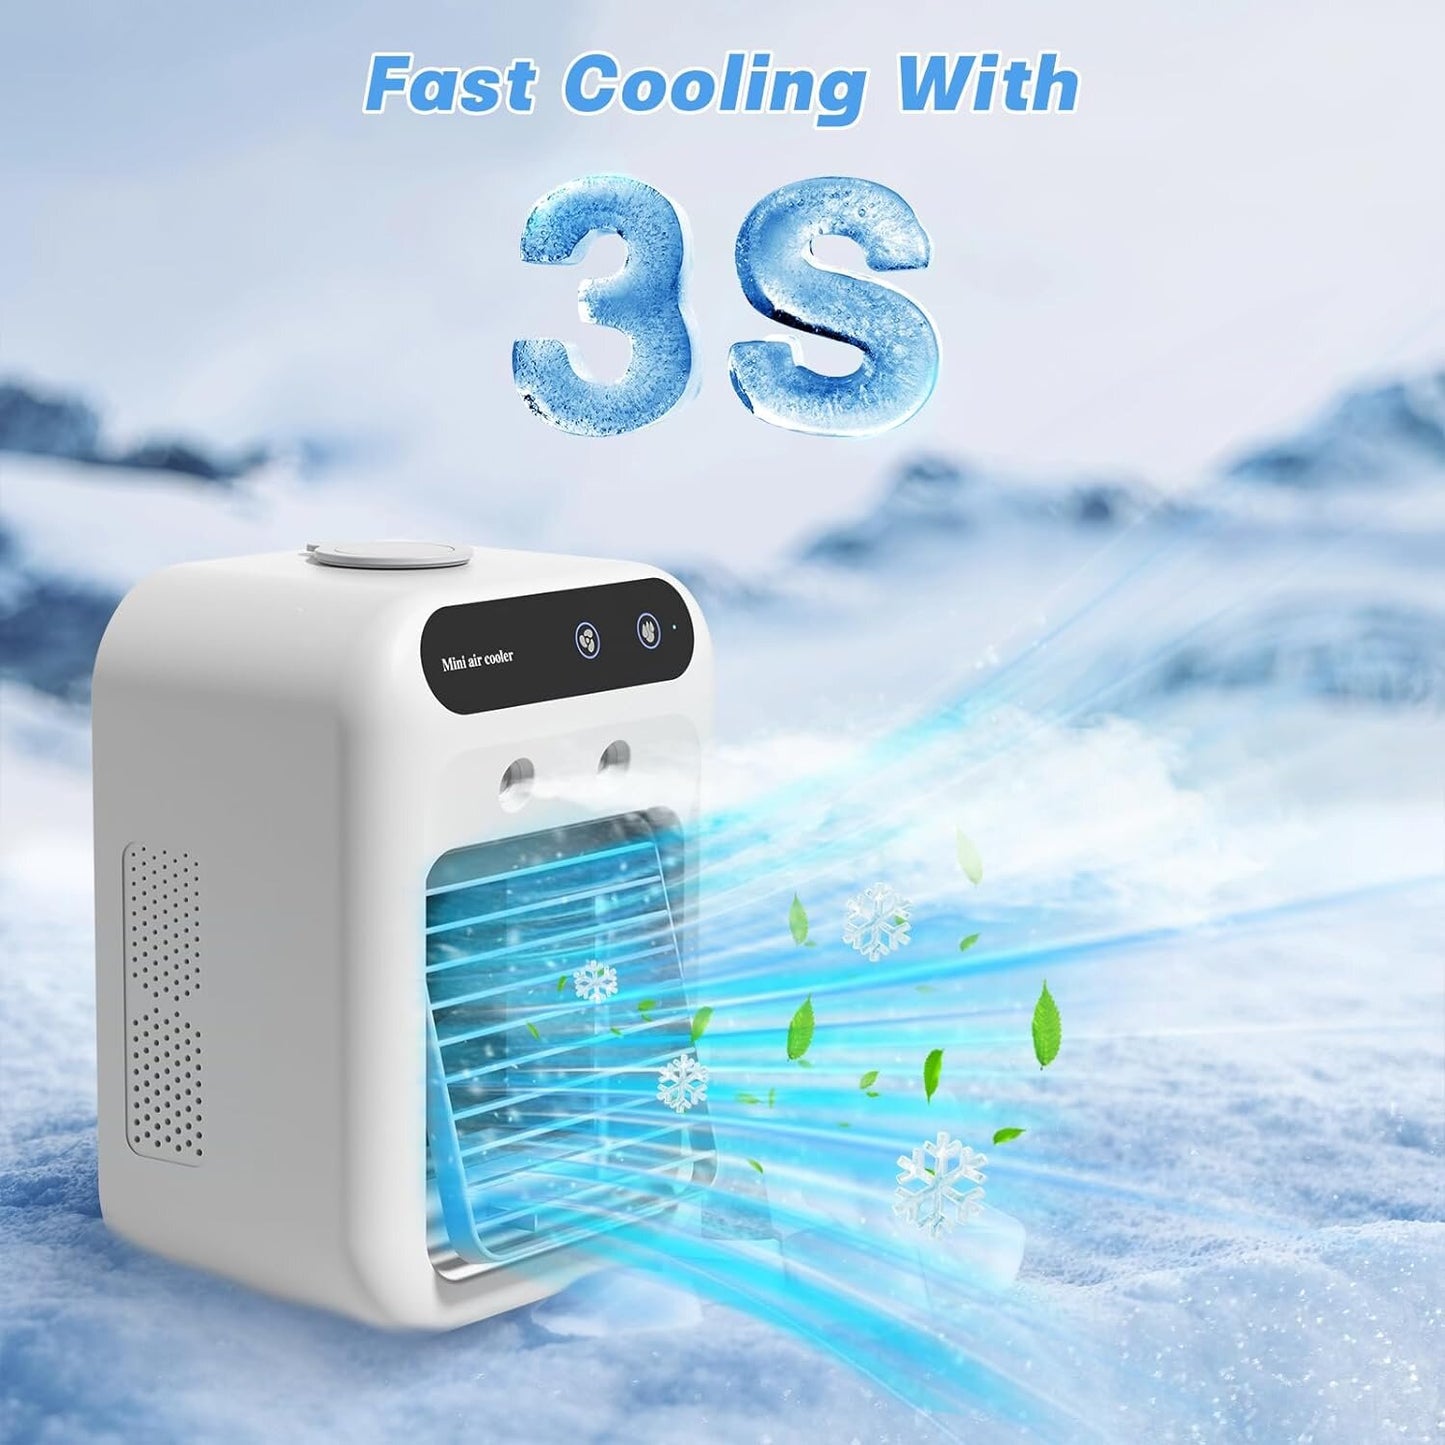 It only takes 3 seconds to cool the air without waiting. The nano-ice mist water type rapid cooling system can quickly cool down by adding ice water.